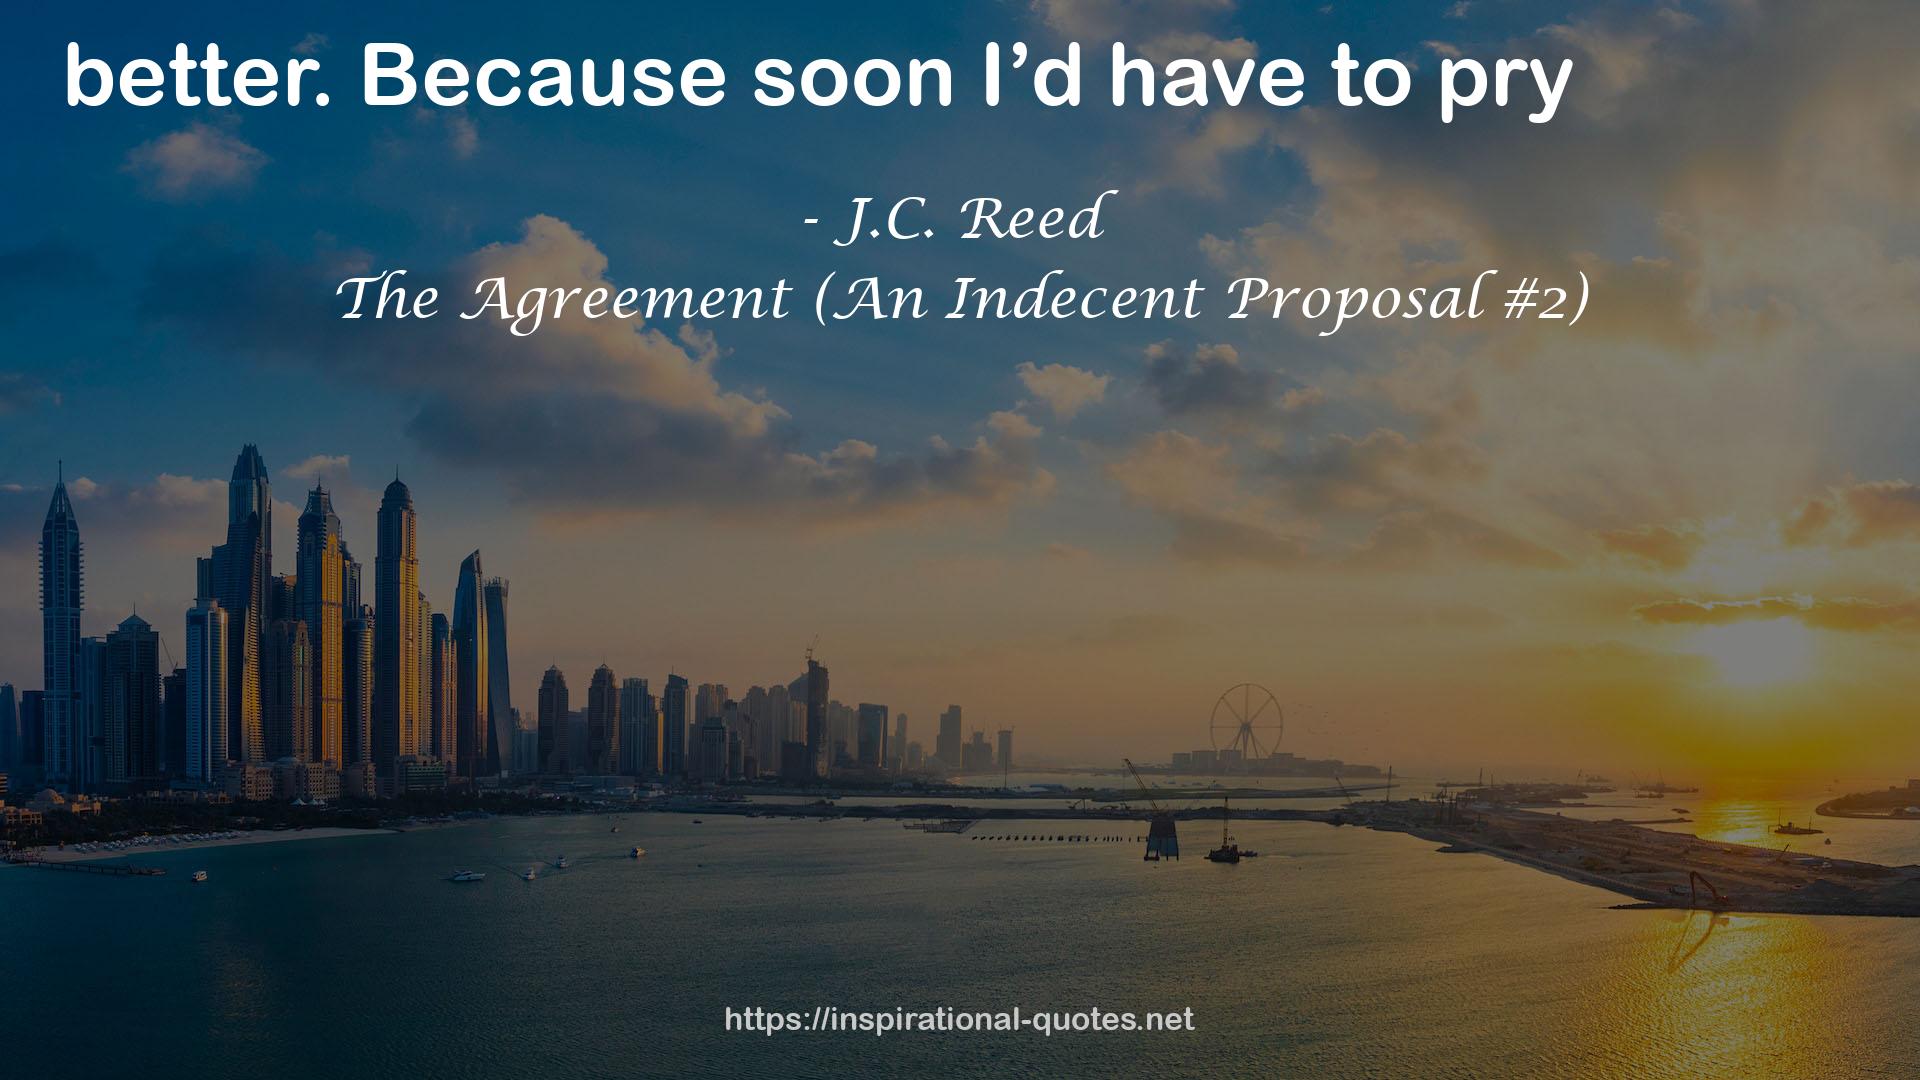 The Agreement (An Indecent Proposal #2) QUOTES